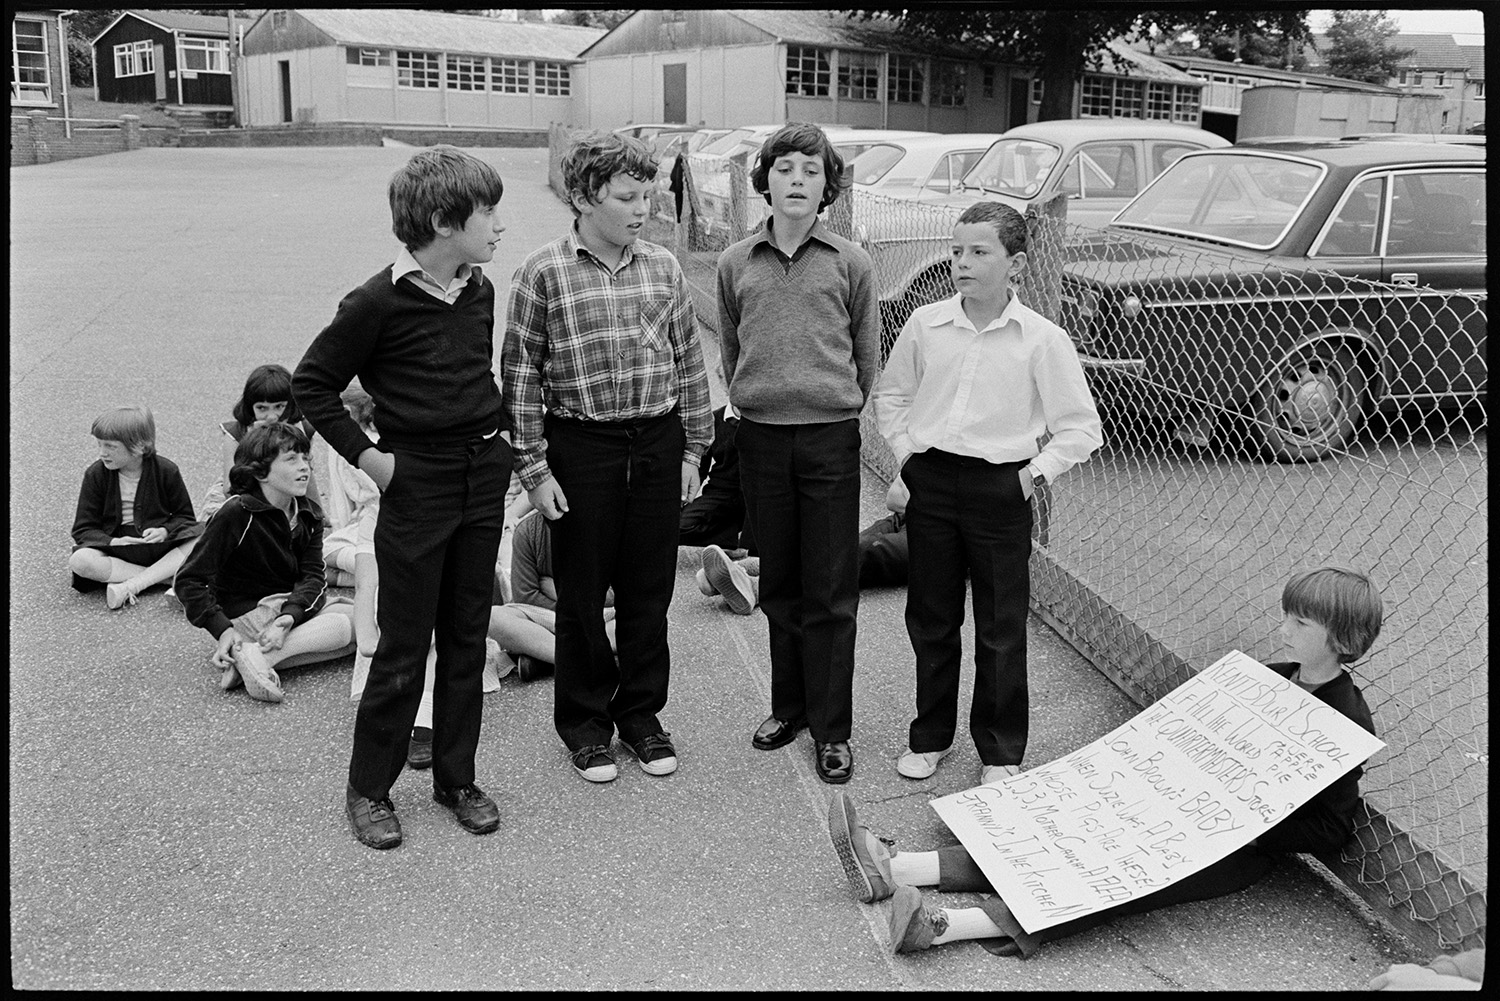 Schoolchildren singing, dancing with folk duo. 
[Four boys singing in a folk workshop, run by folk duo Sam Richards and Tish Richards, in the playground of a school in Barnstaple. One boy is holding a poster, possibly with song words. Other children are sat down listening. Parked cars and school buildings can be seen in the background.]